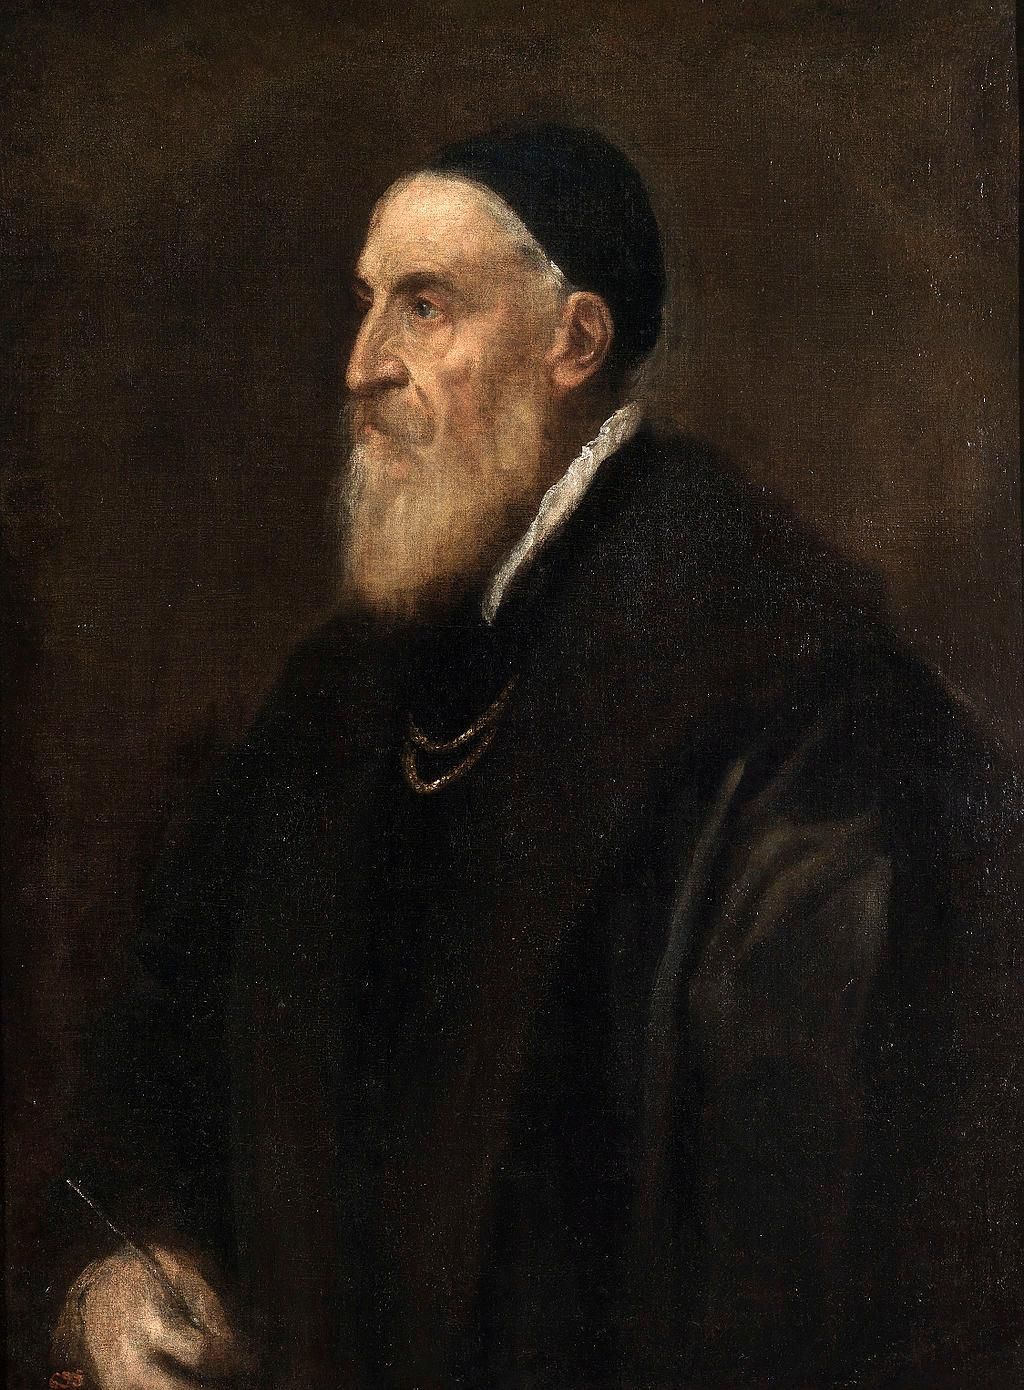 A self-portrait of Titian dated to around 1567